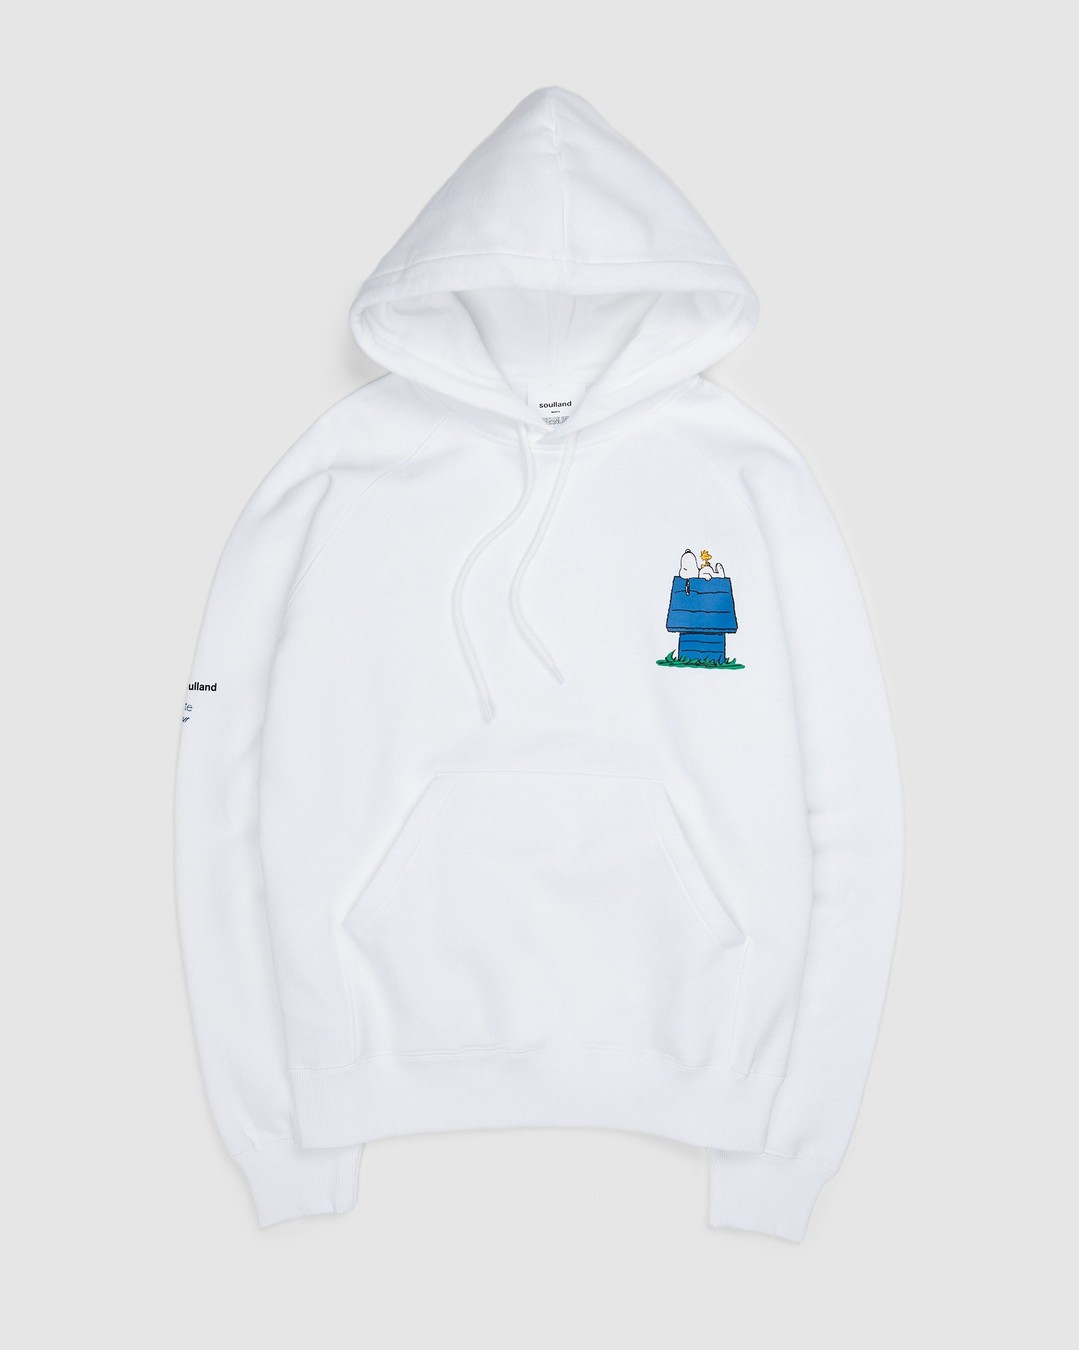 Colette Mon Amour x Soulland – Snoopy Bed White Hoodie - Hoodies - White - Image 1